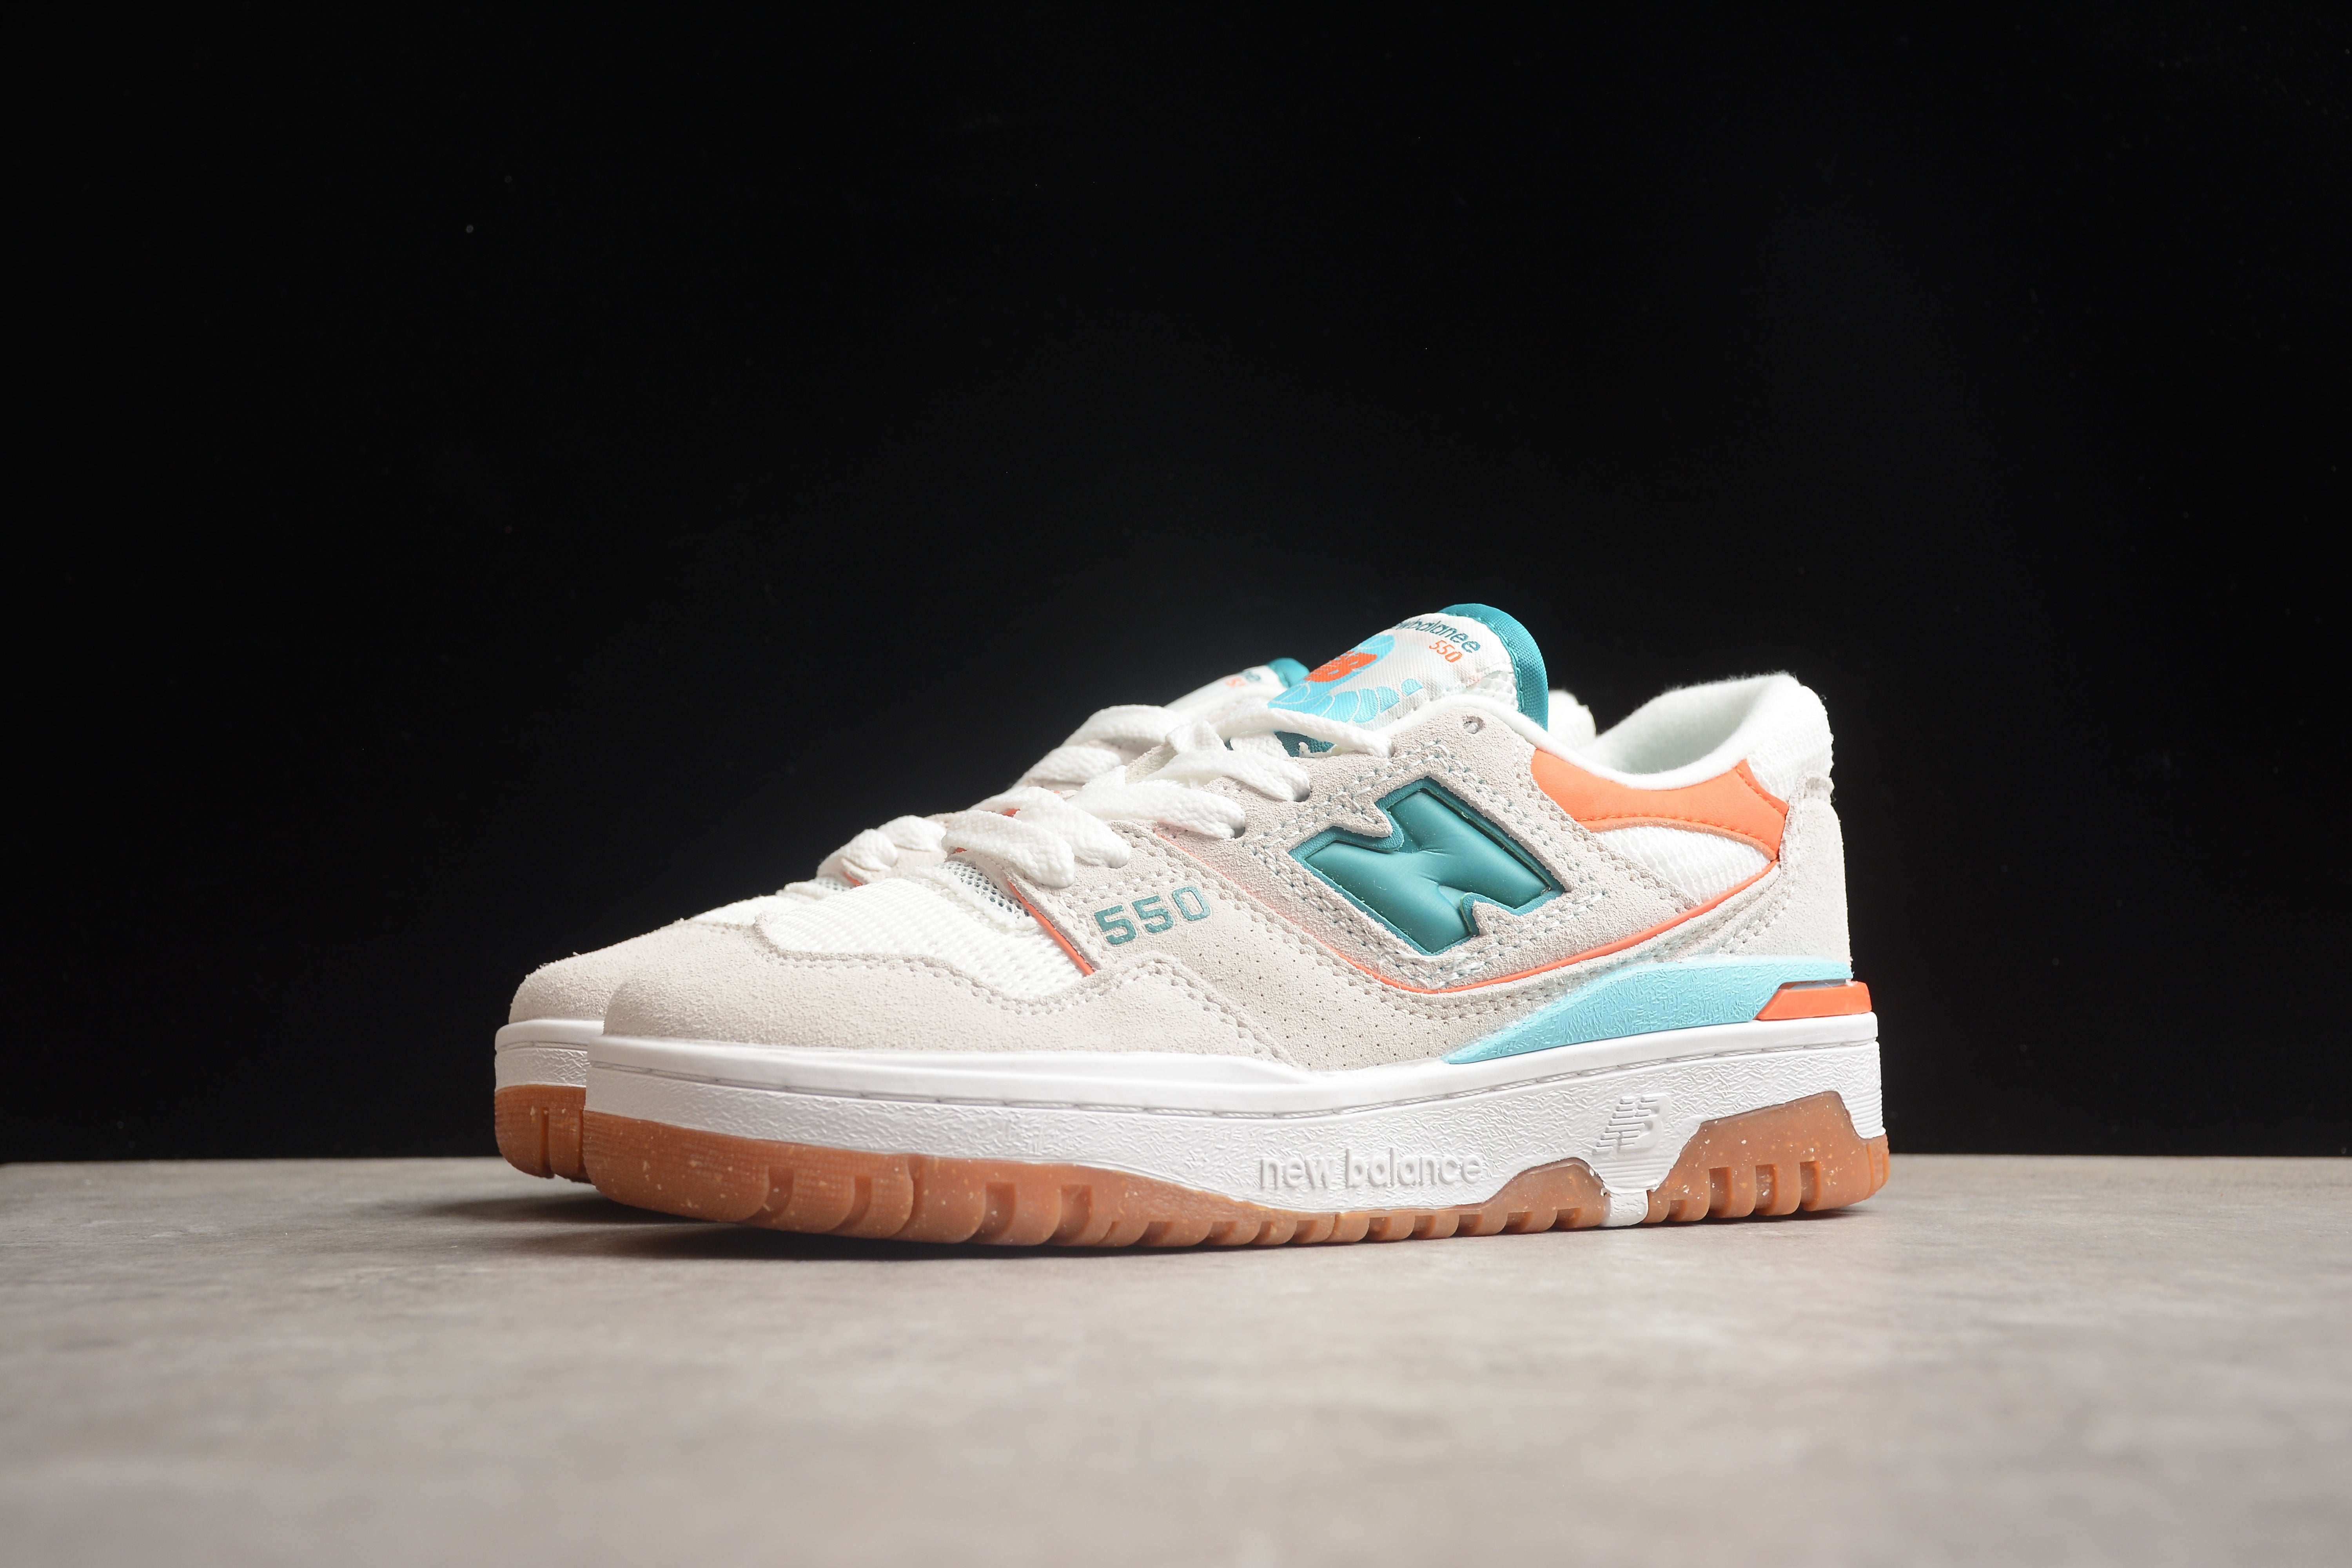 NB 550 colorway shoes